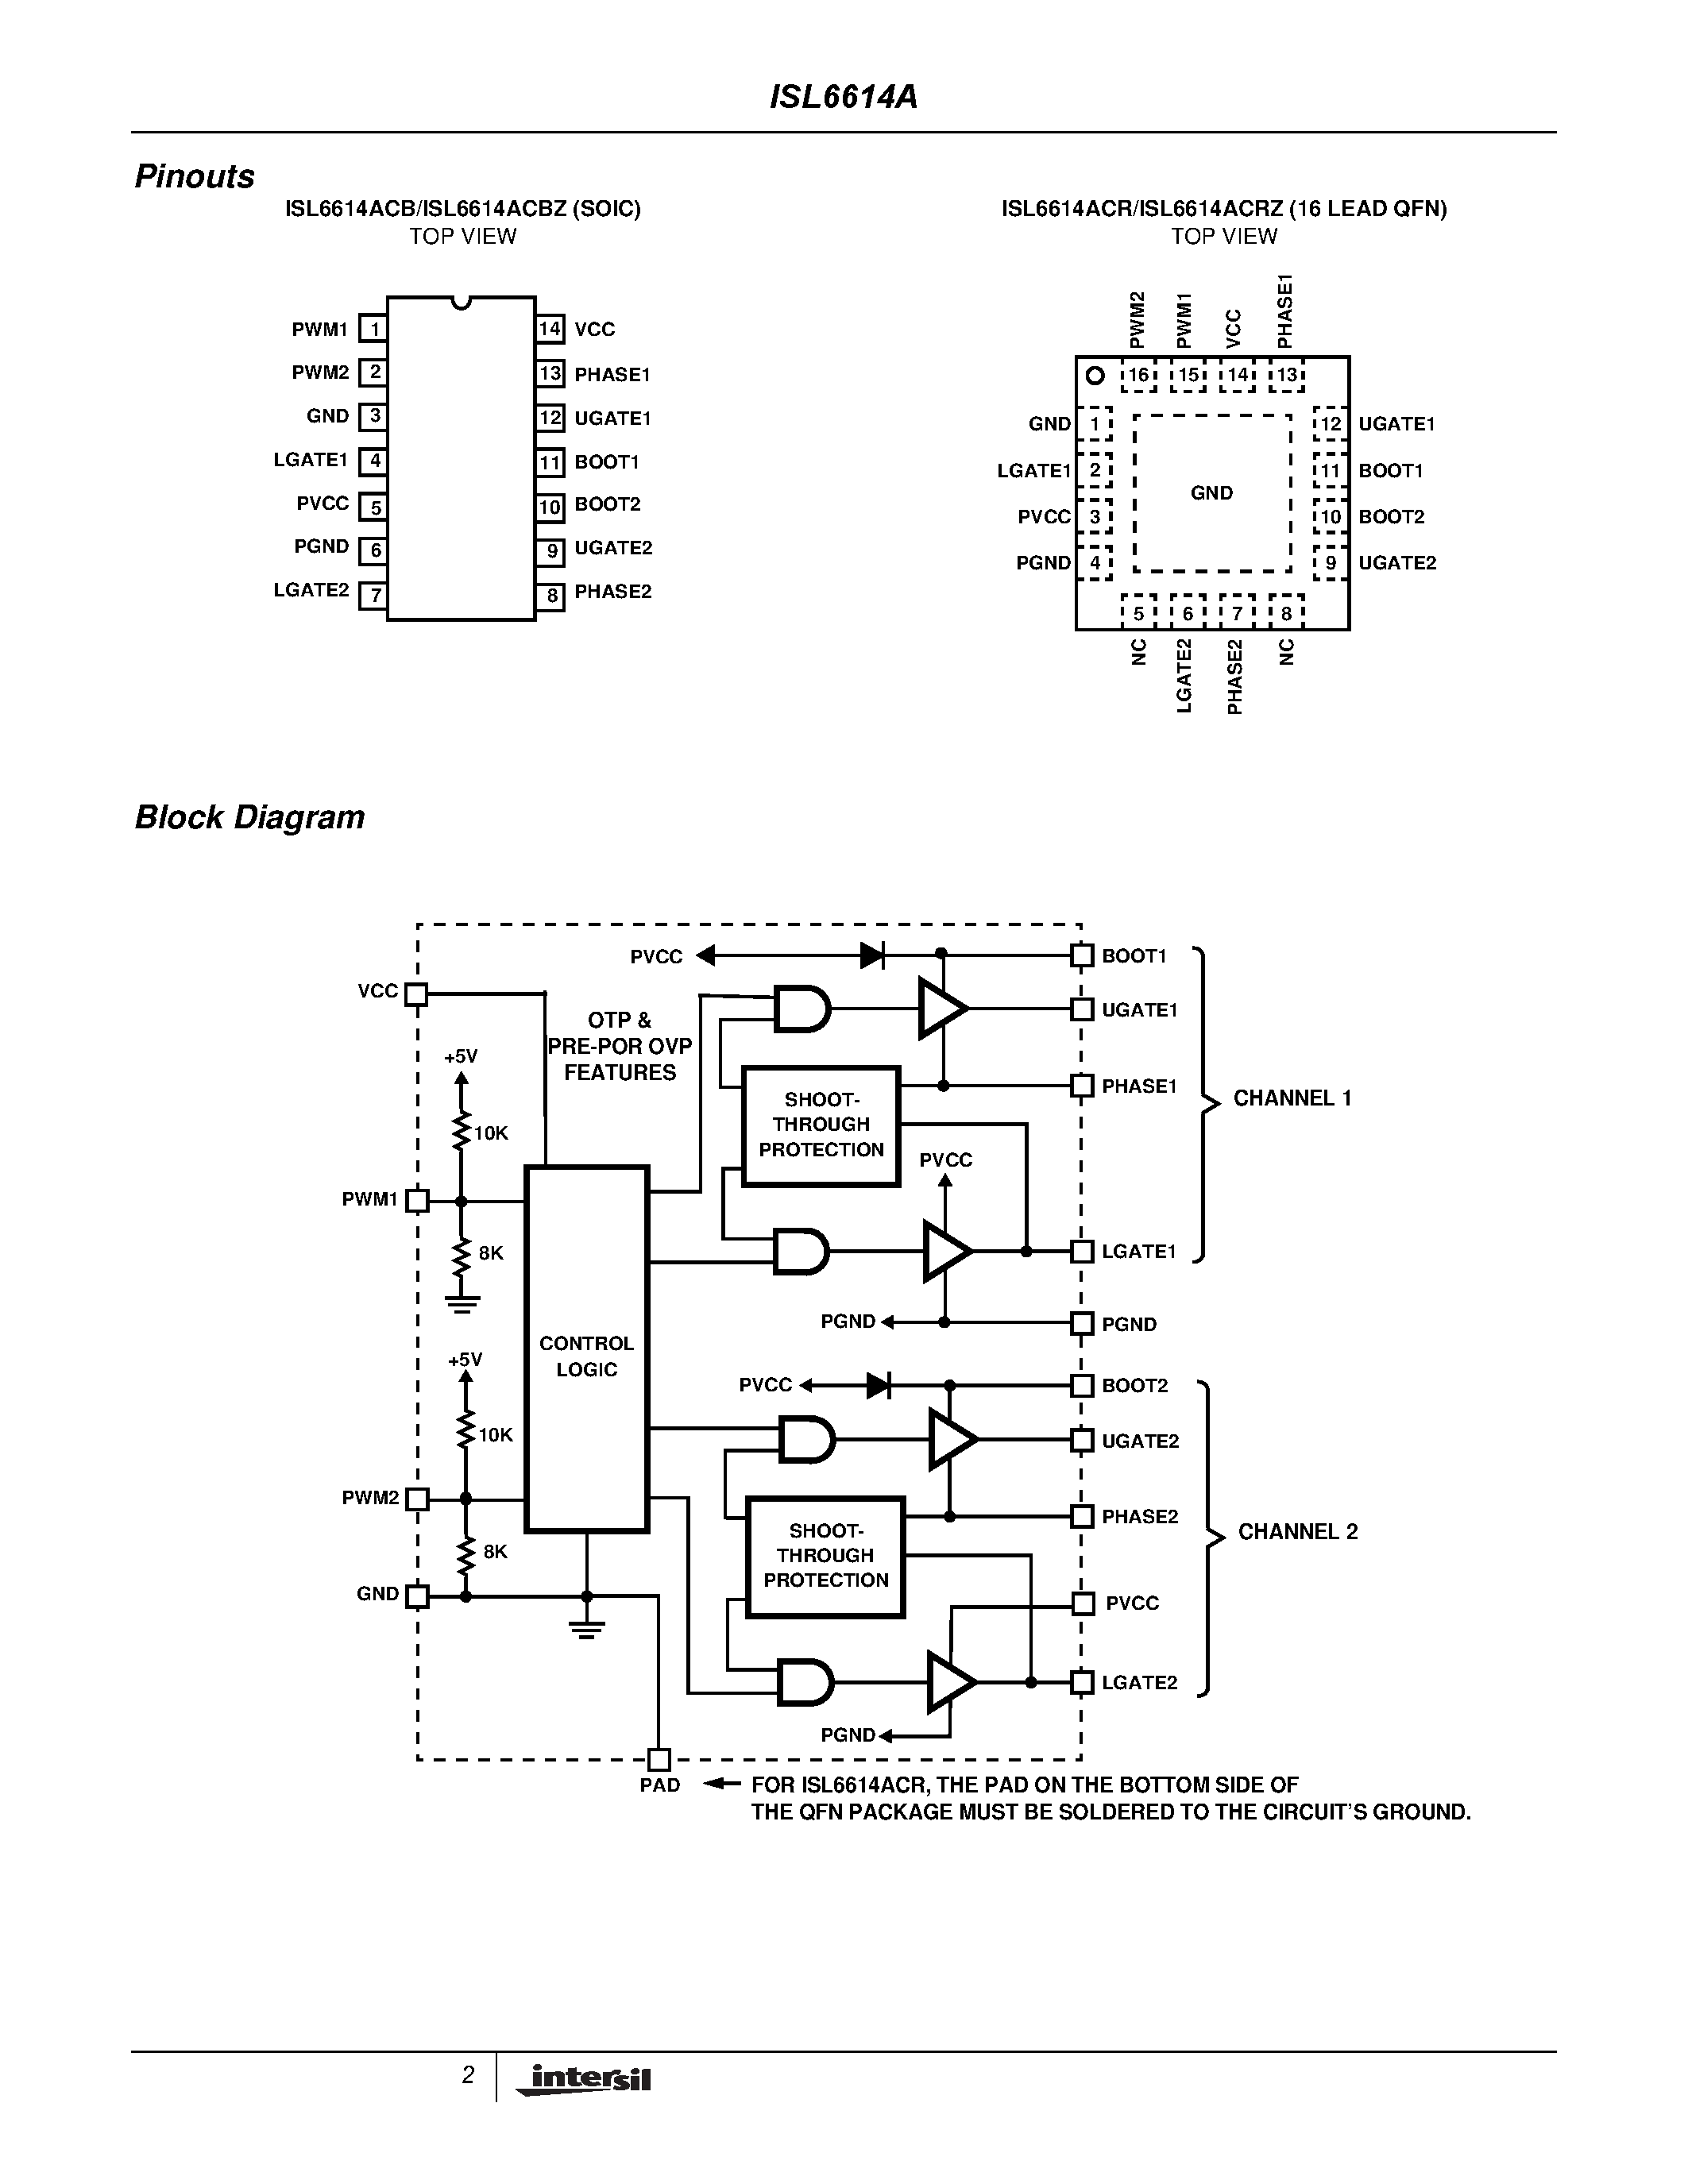 Datasheet ISL6614ACBZ-T - Dual Advanced Synchronous Rectified Buck MOSFET Drivers with Pre-POR OVP page 2